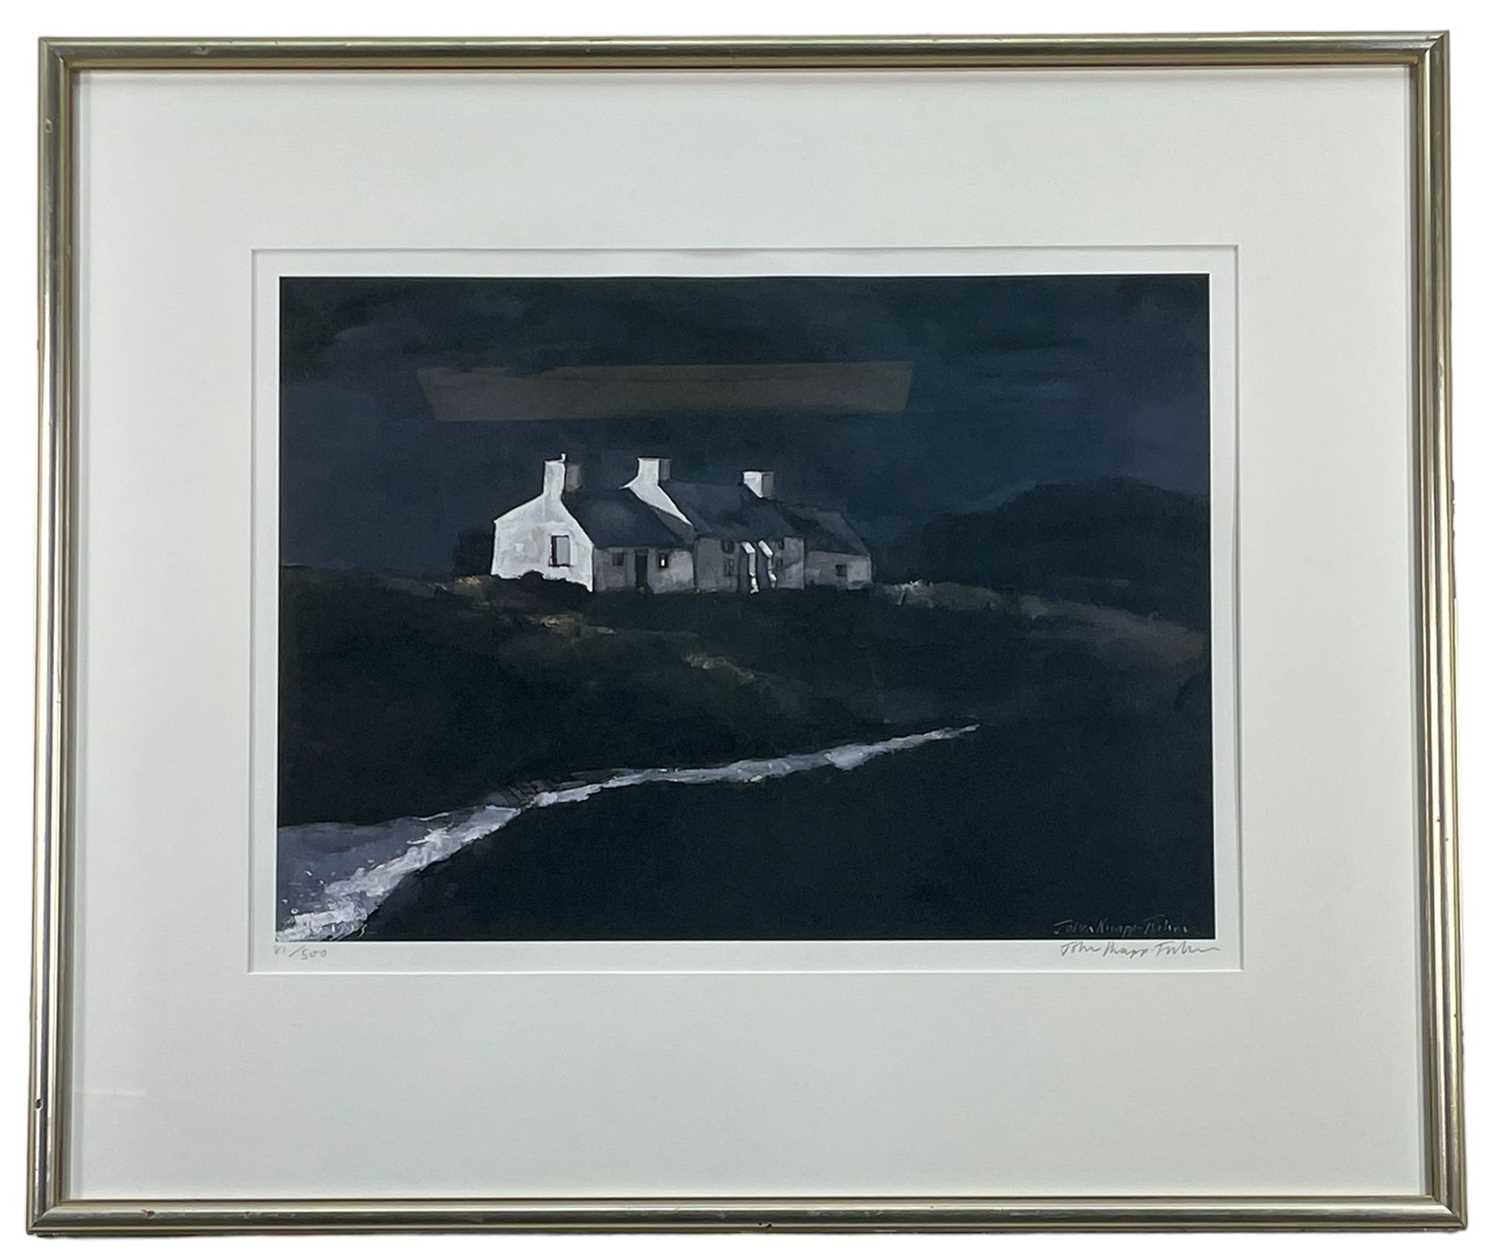 ‡ JOHN KNAPP-FISHER limited edition (81/500) print - 'Cottage Porthclais', signed in - Image 2 of 2